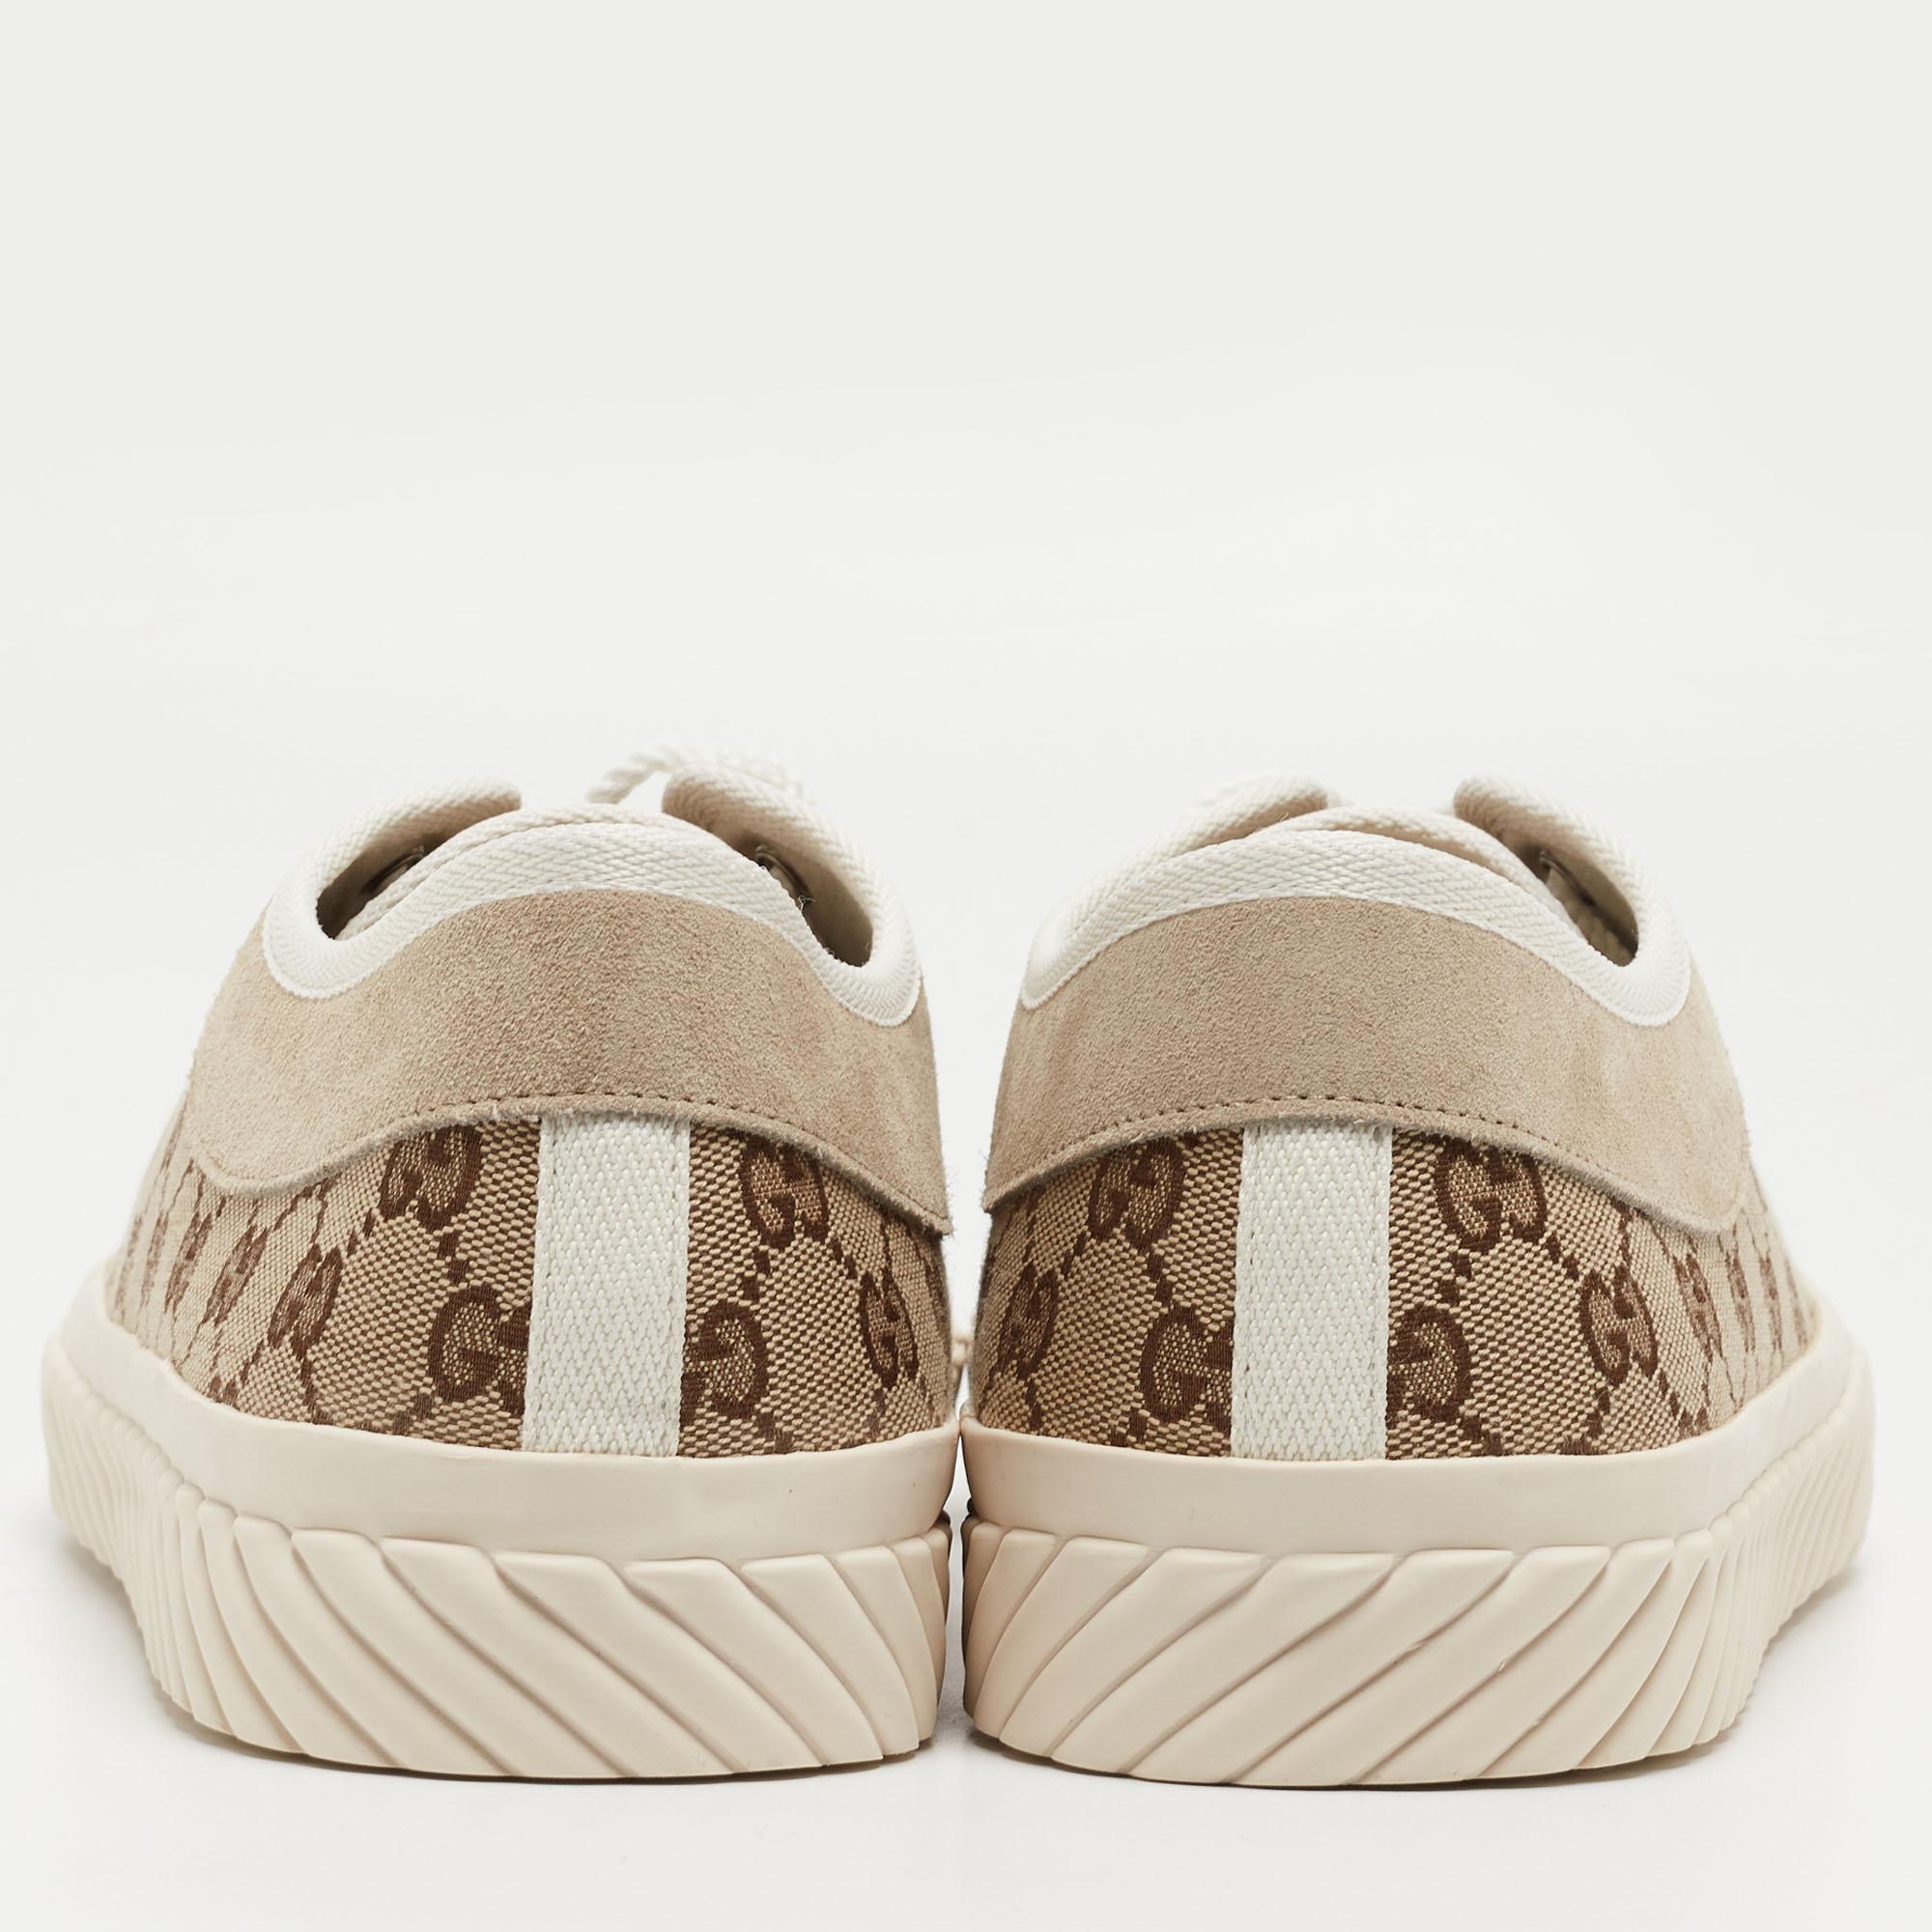 Gucci Beige Canvas and Suede Low Top Sneakers Size 46 In Excellent Condition For Sale In Dubai, Al Qouz 2